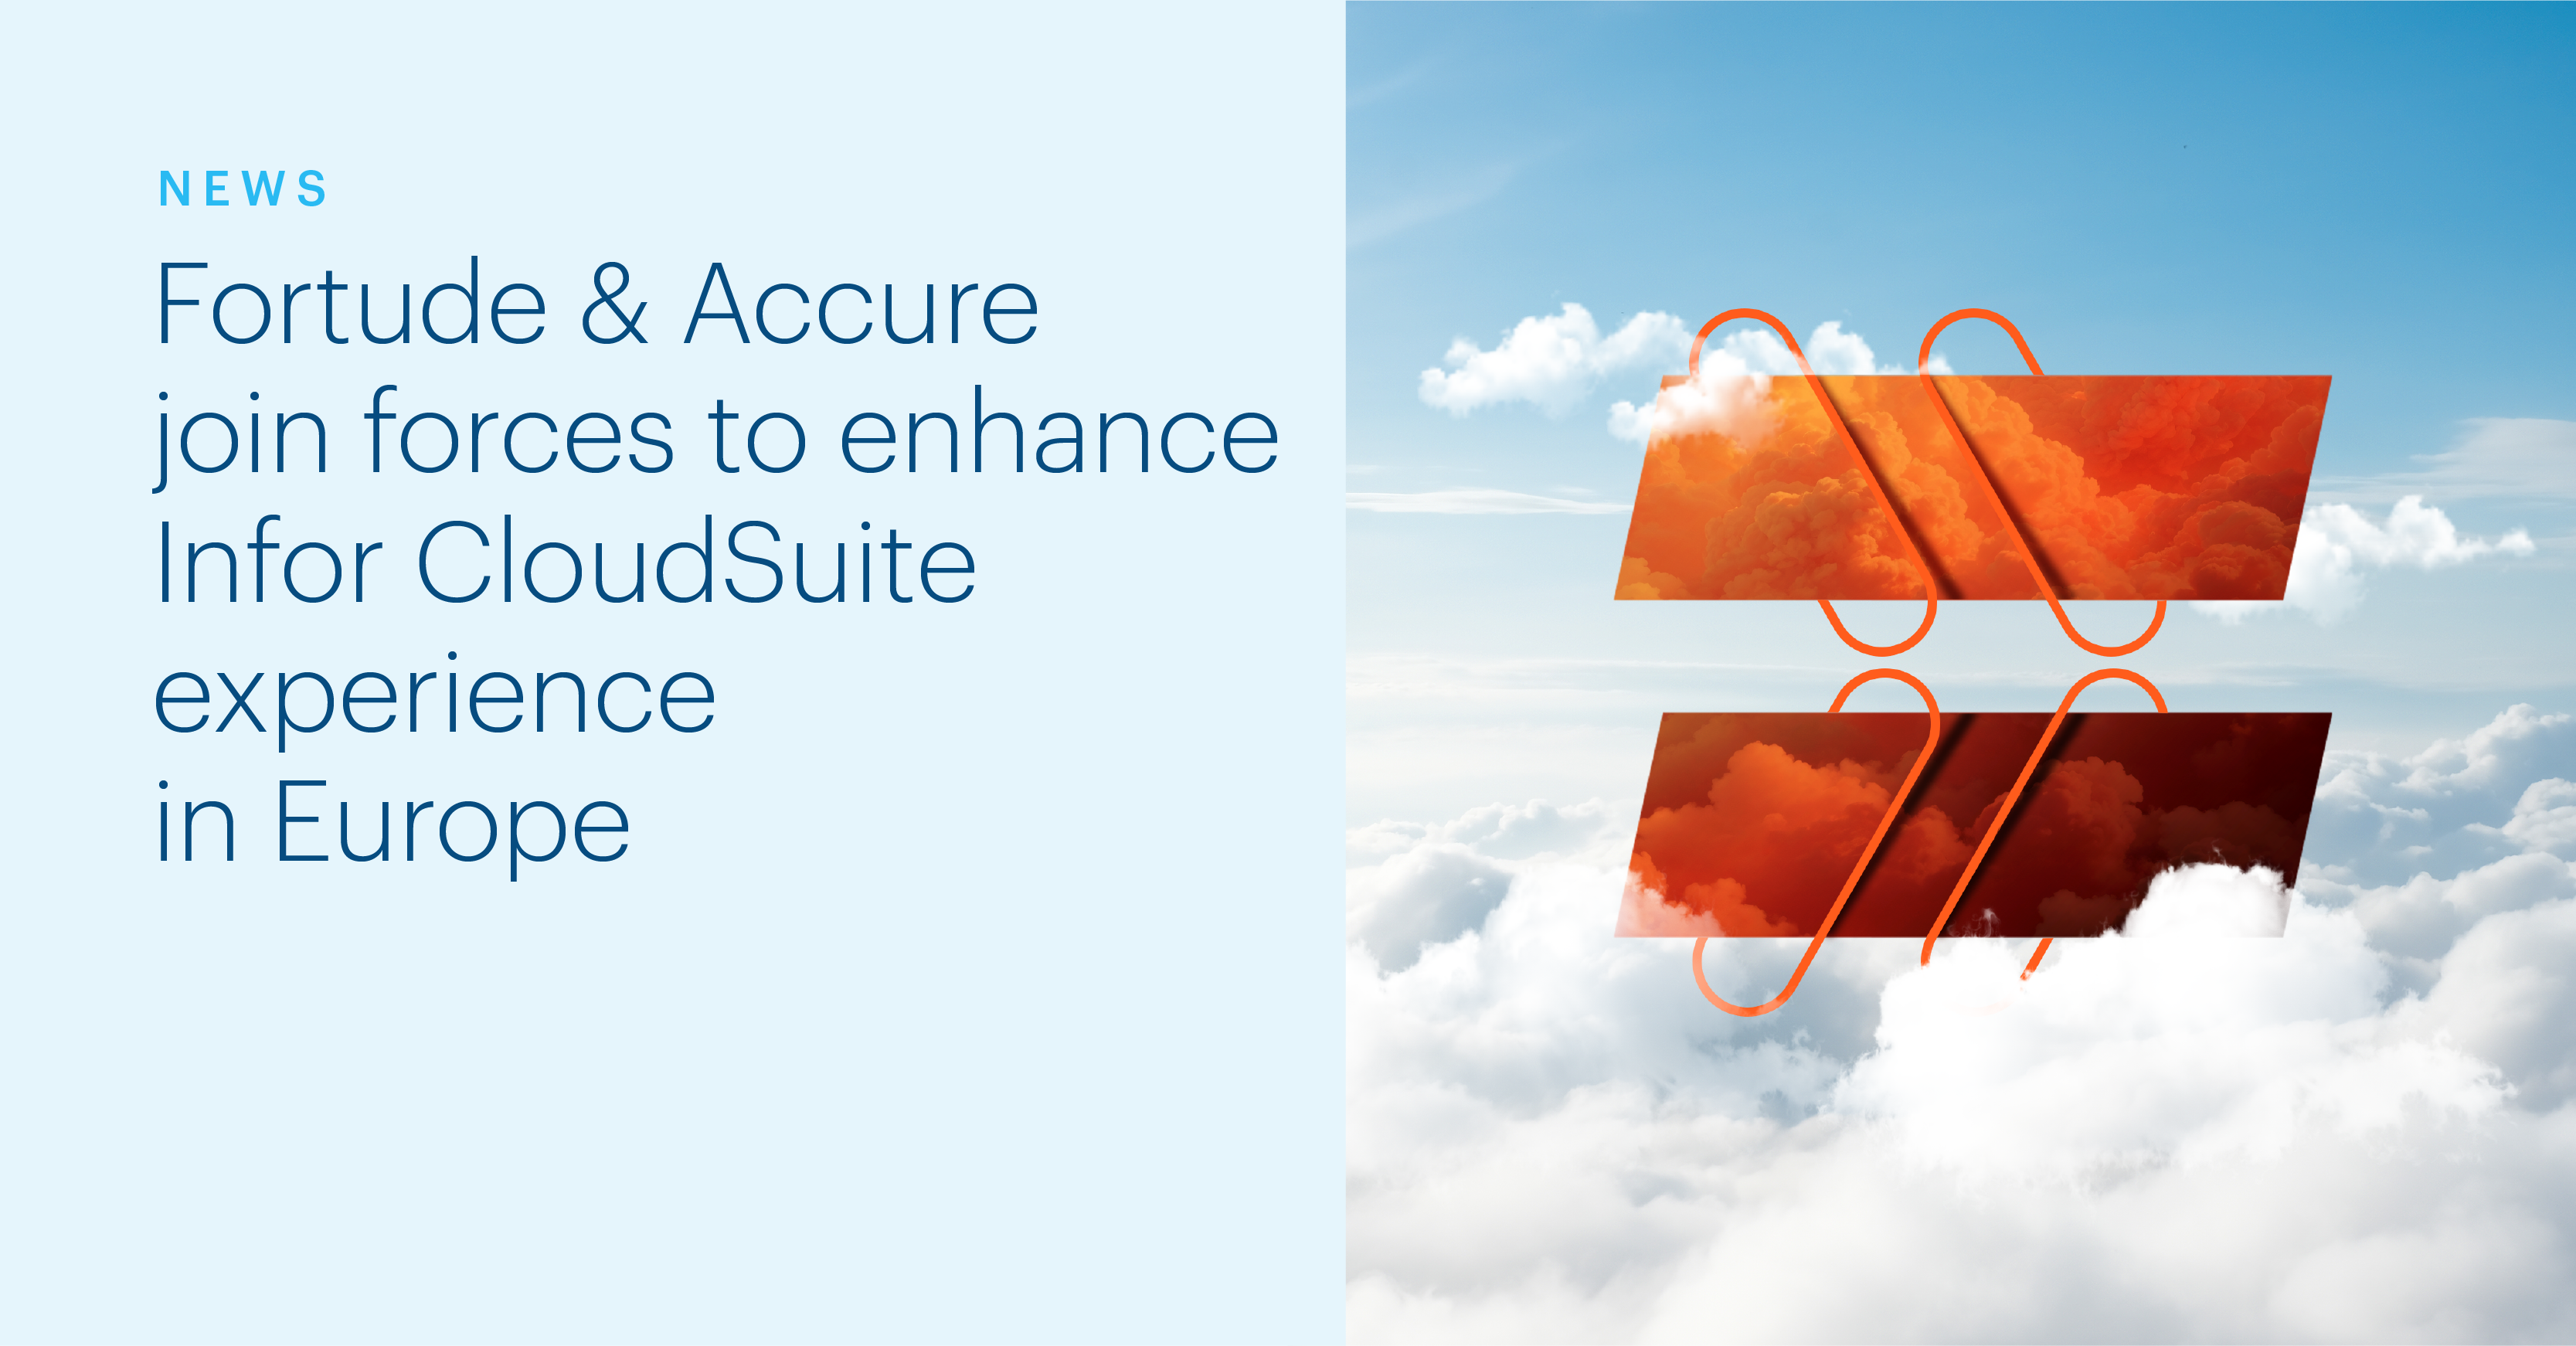 Fortude & Accure Join Forces to enhance Infor CloudSuite experience in Europe